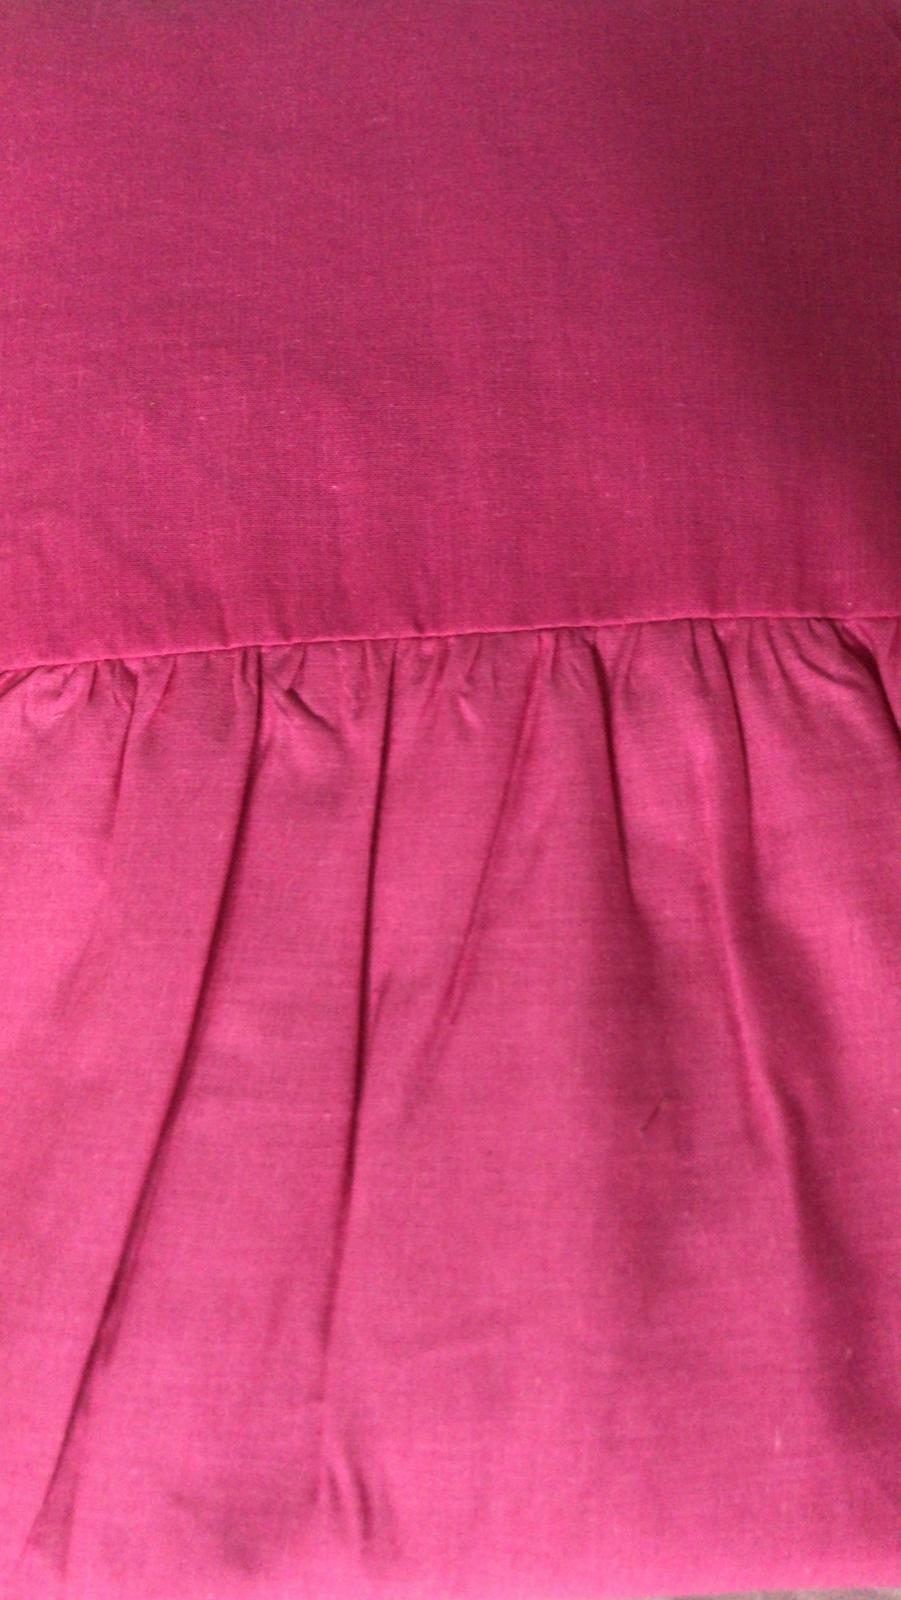 Plain Dyed Deep Fitted Valance Sheet Poly Cotton Sheet Single Double King Super King ⭐⭐⭐⭐